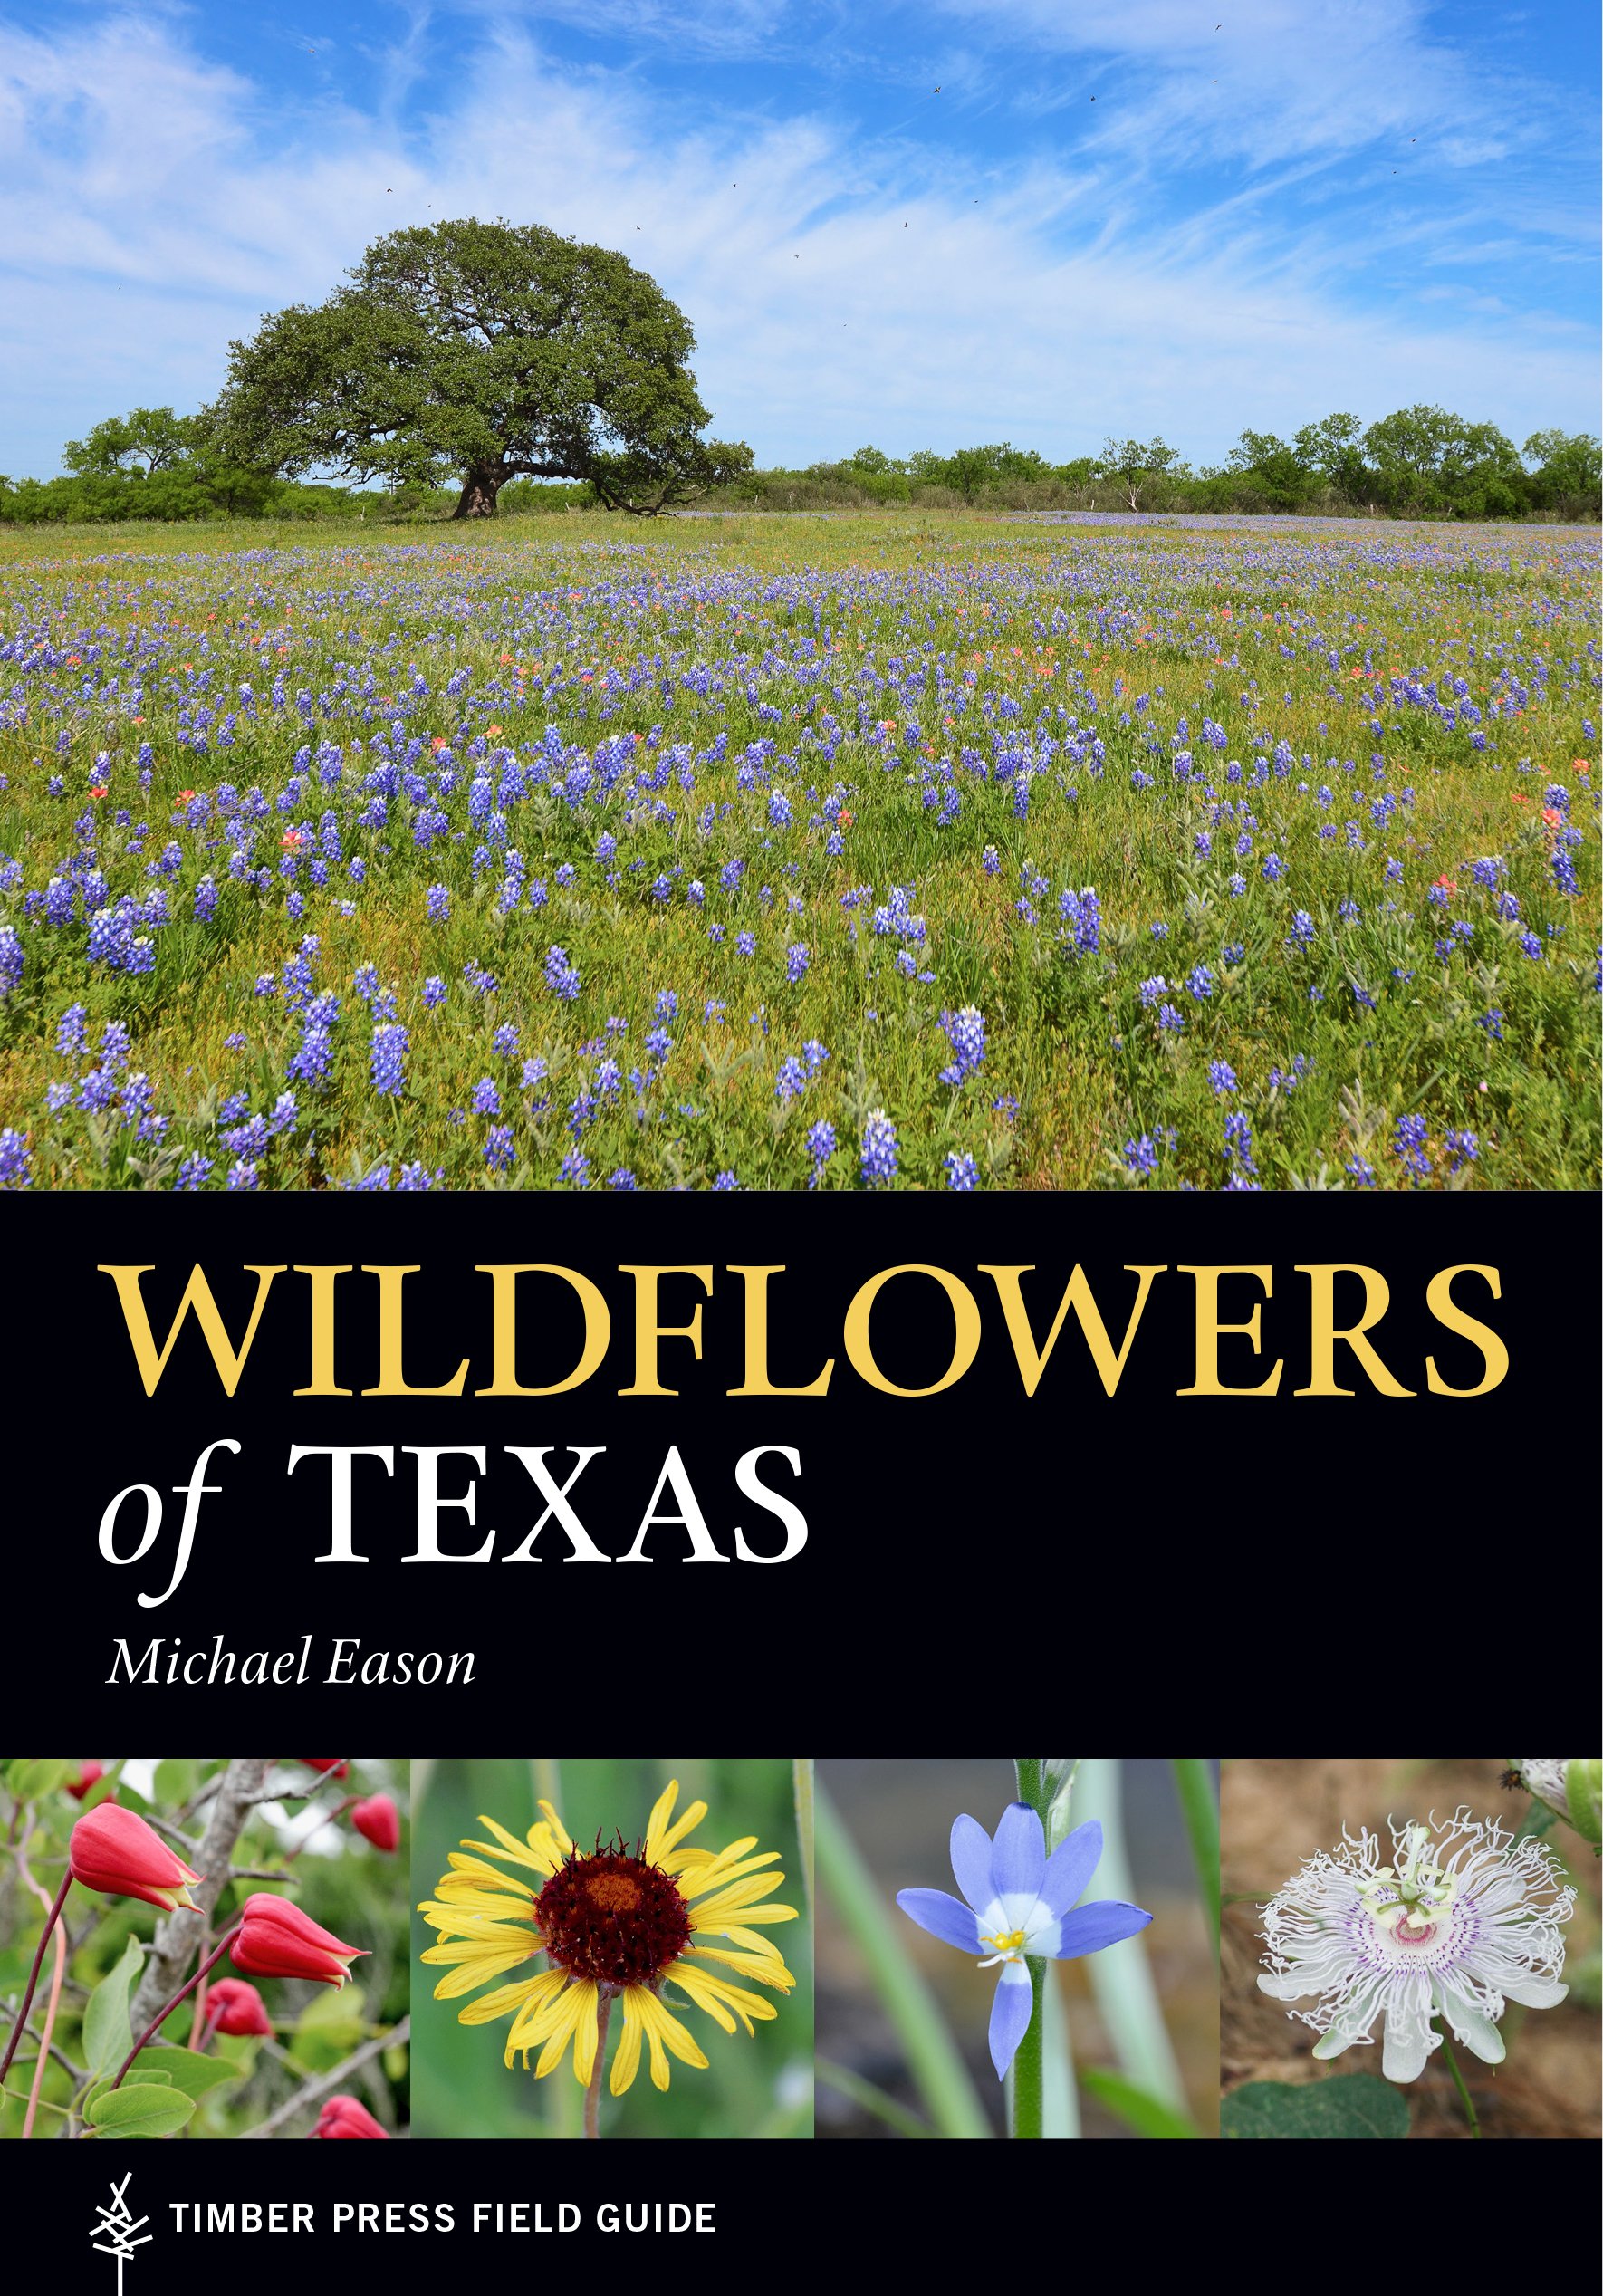 Wildflowers of Texas (A Timber Press Field Guide): Michael Eason ...